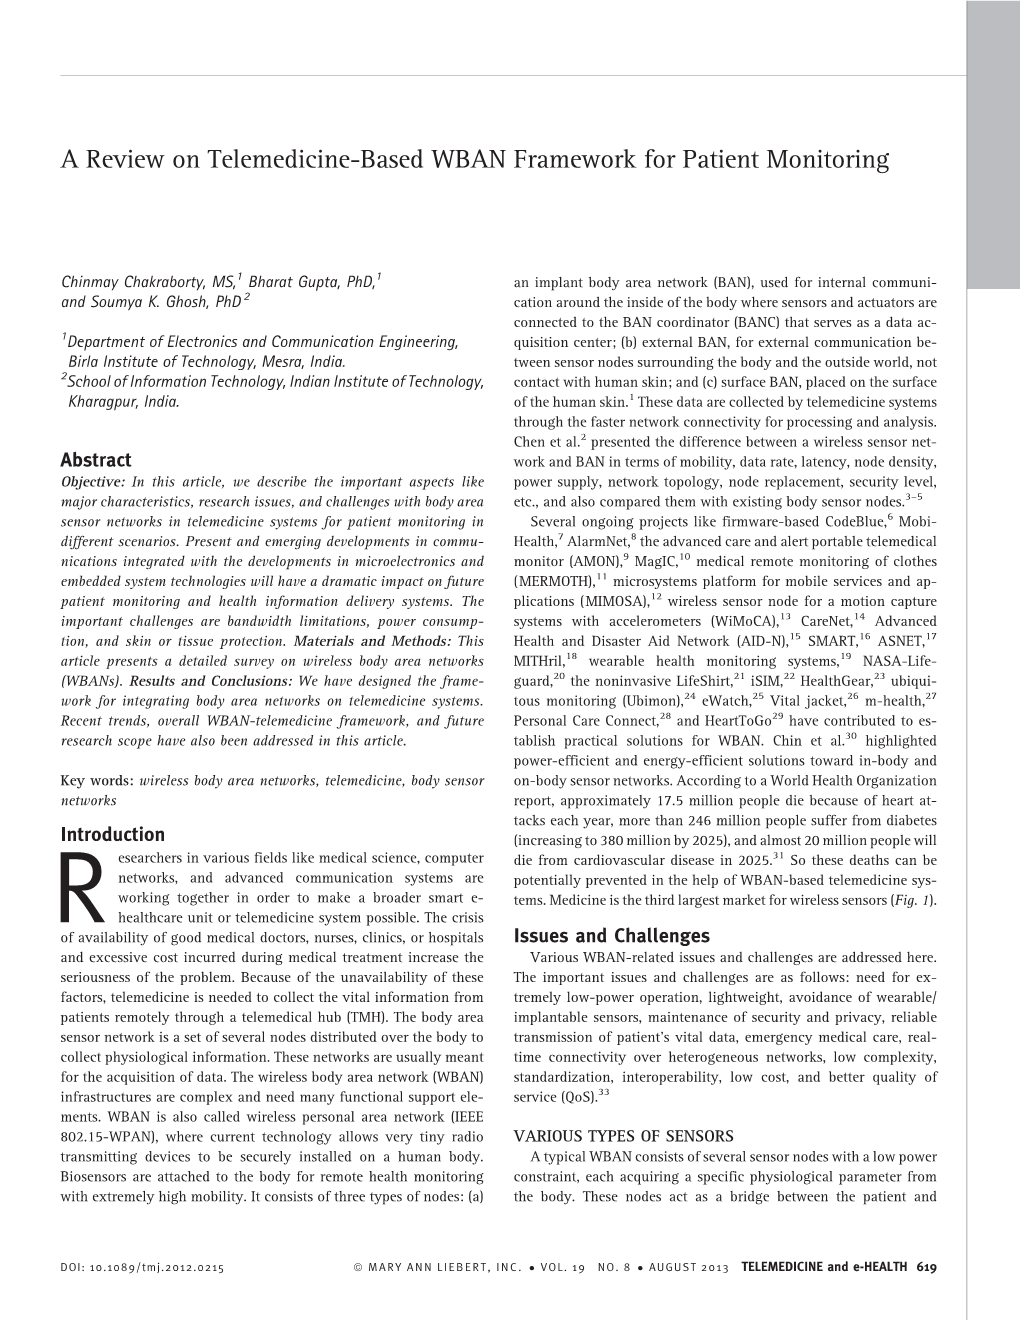 A Review on Telemedicine-Based WBAN Framework for Patient Monitoring